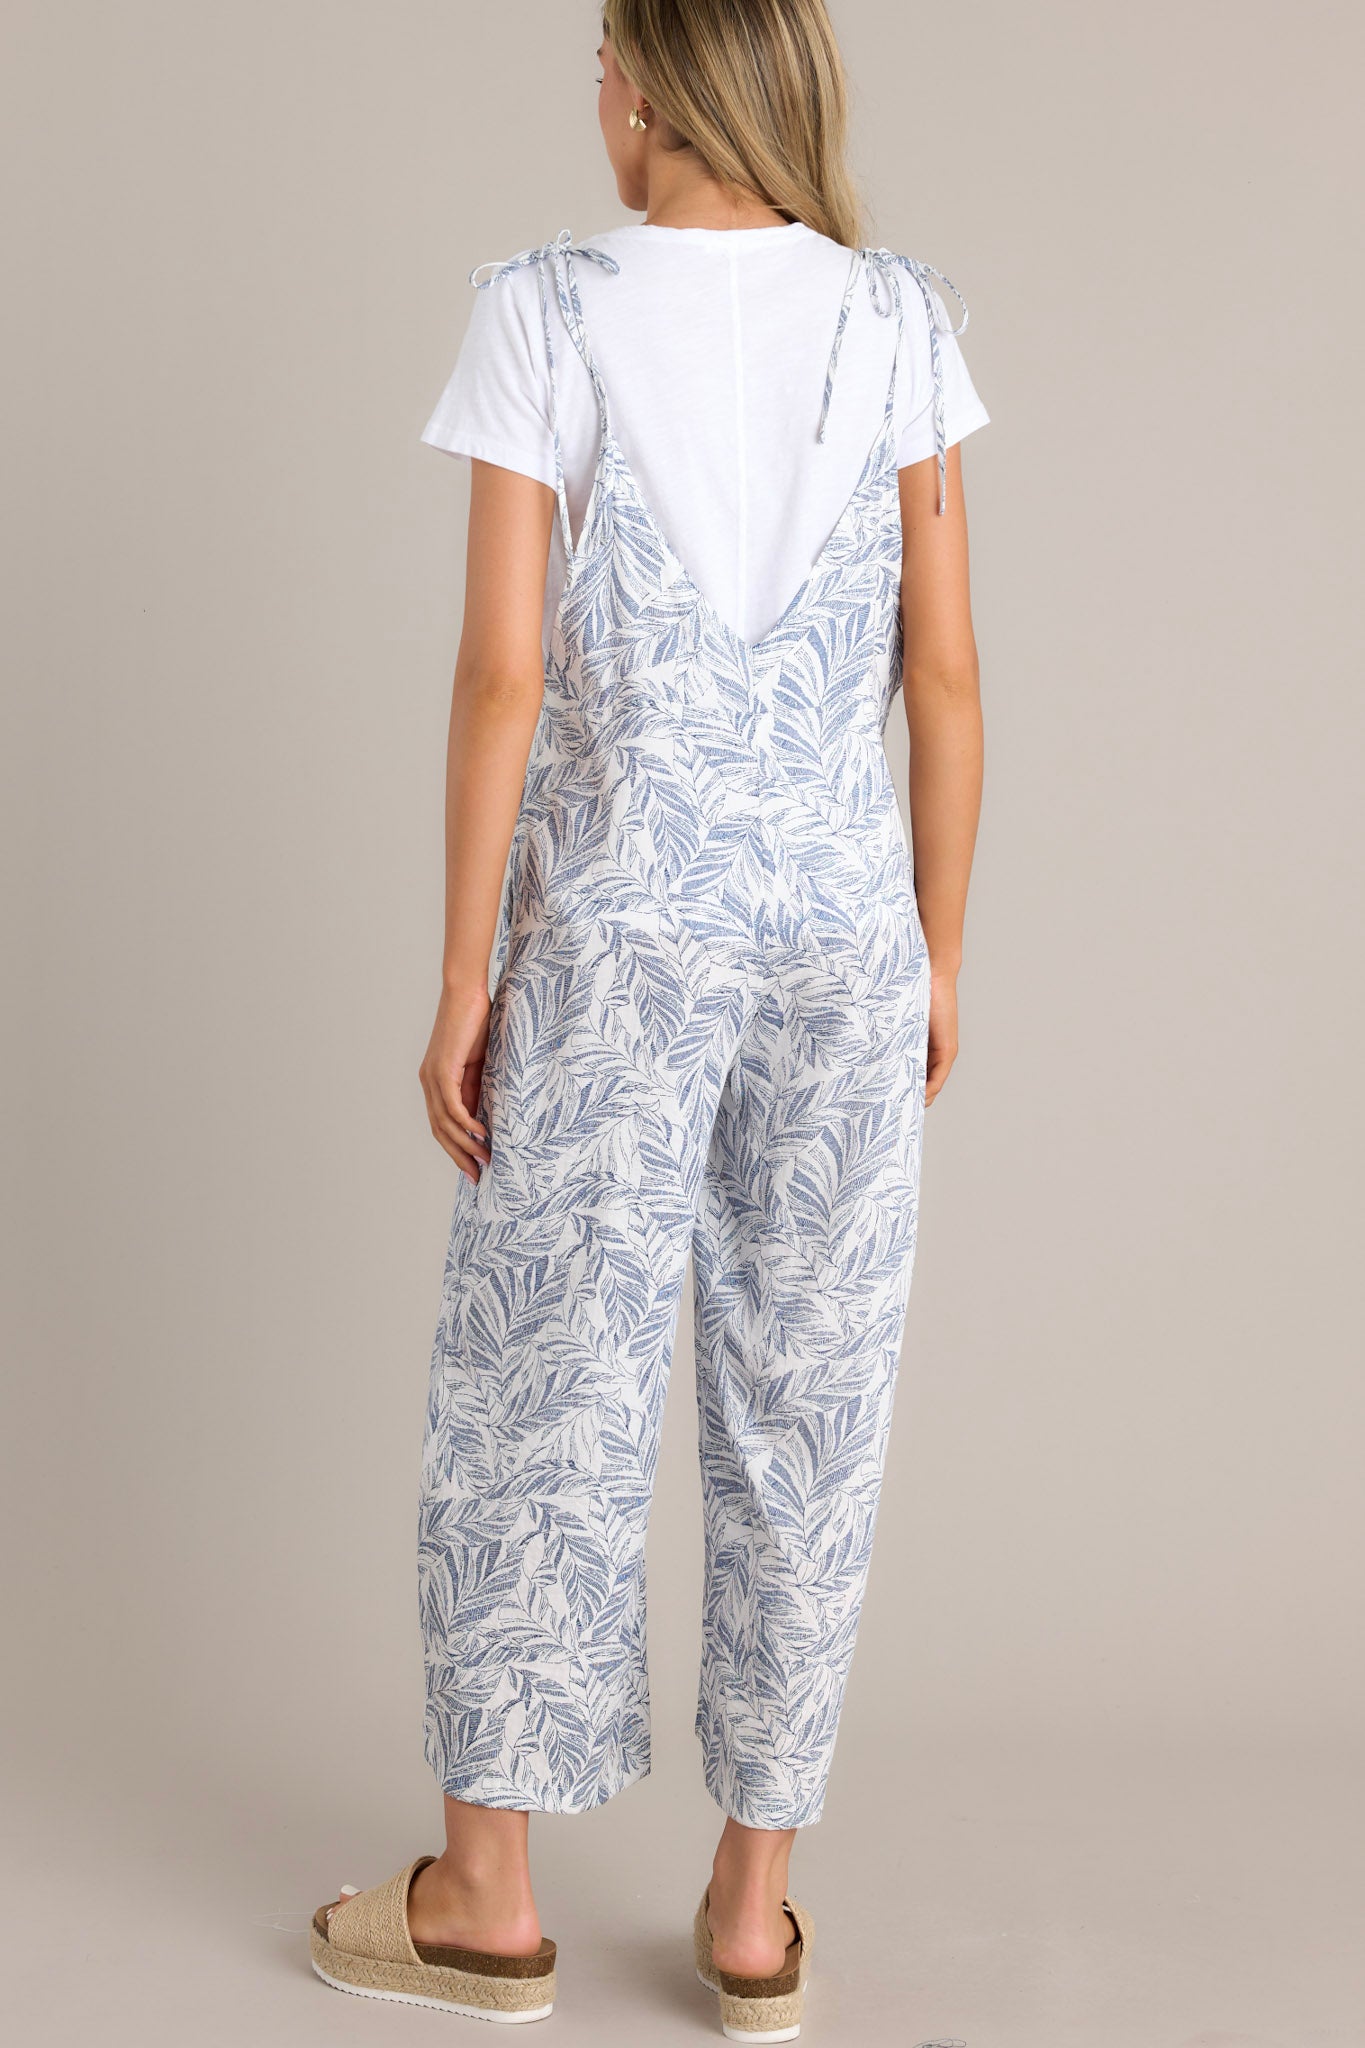 Back view of this Casual jumpsuit featuring a light blue and white leaf print, wide legs, and adjustable tie straps.